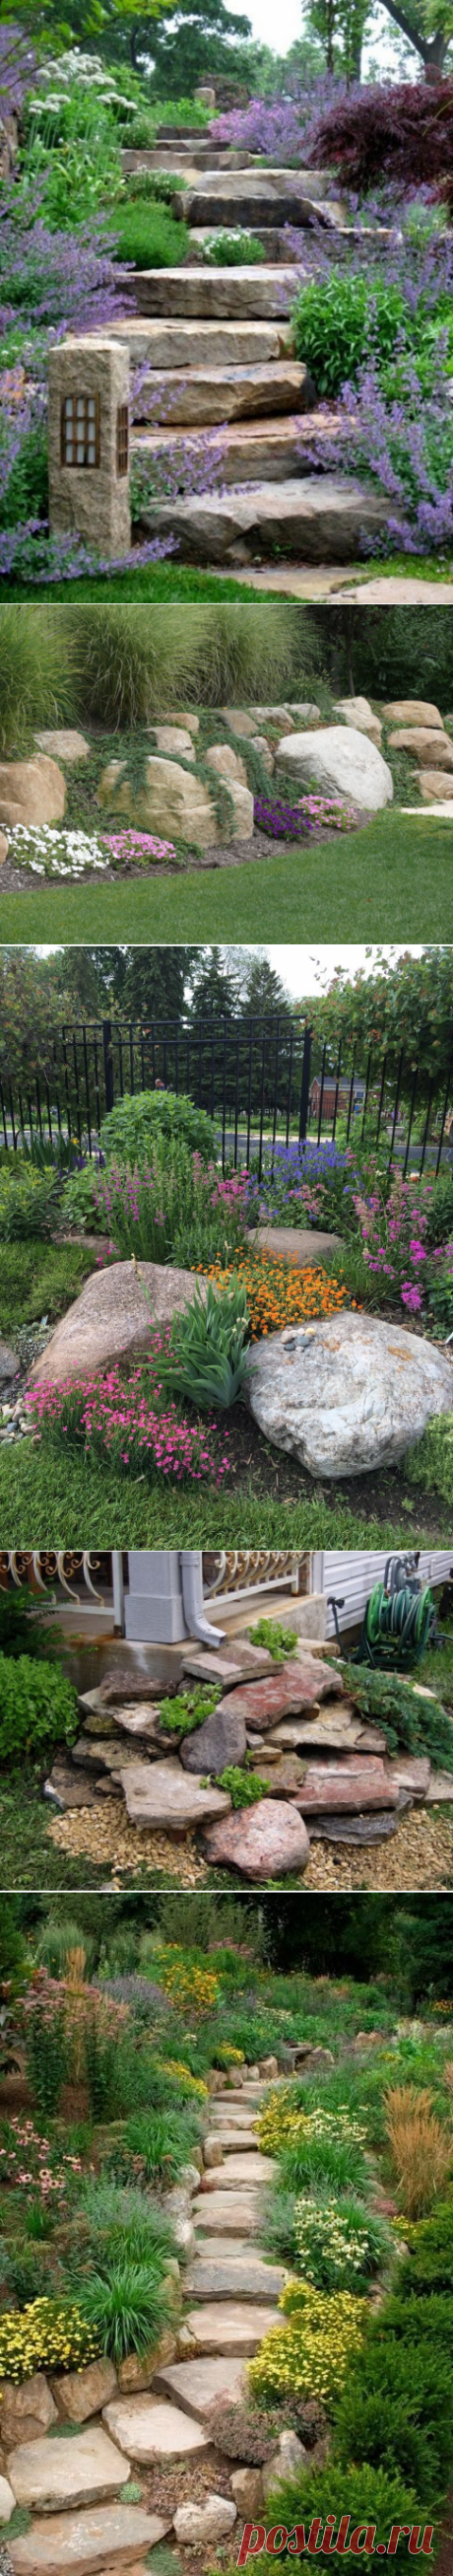 Easy Ideas for Landscaping with Rocks